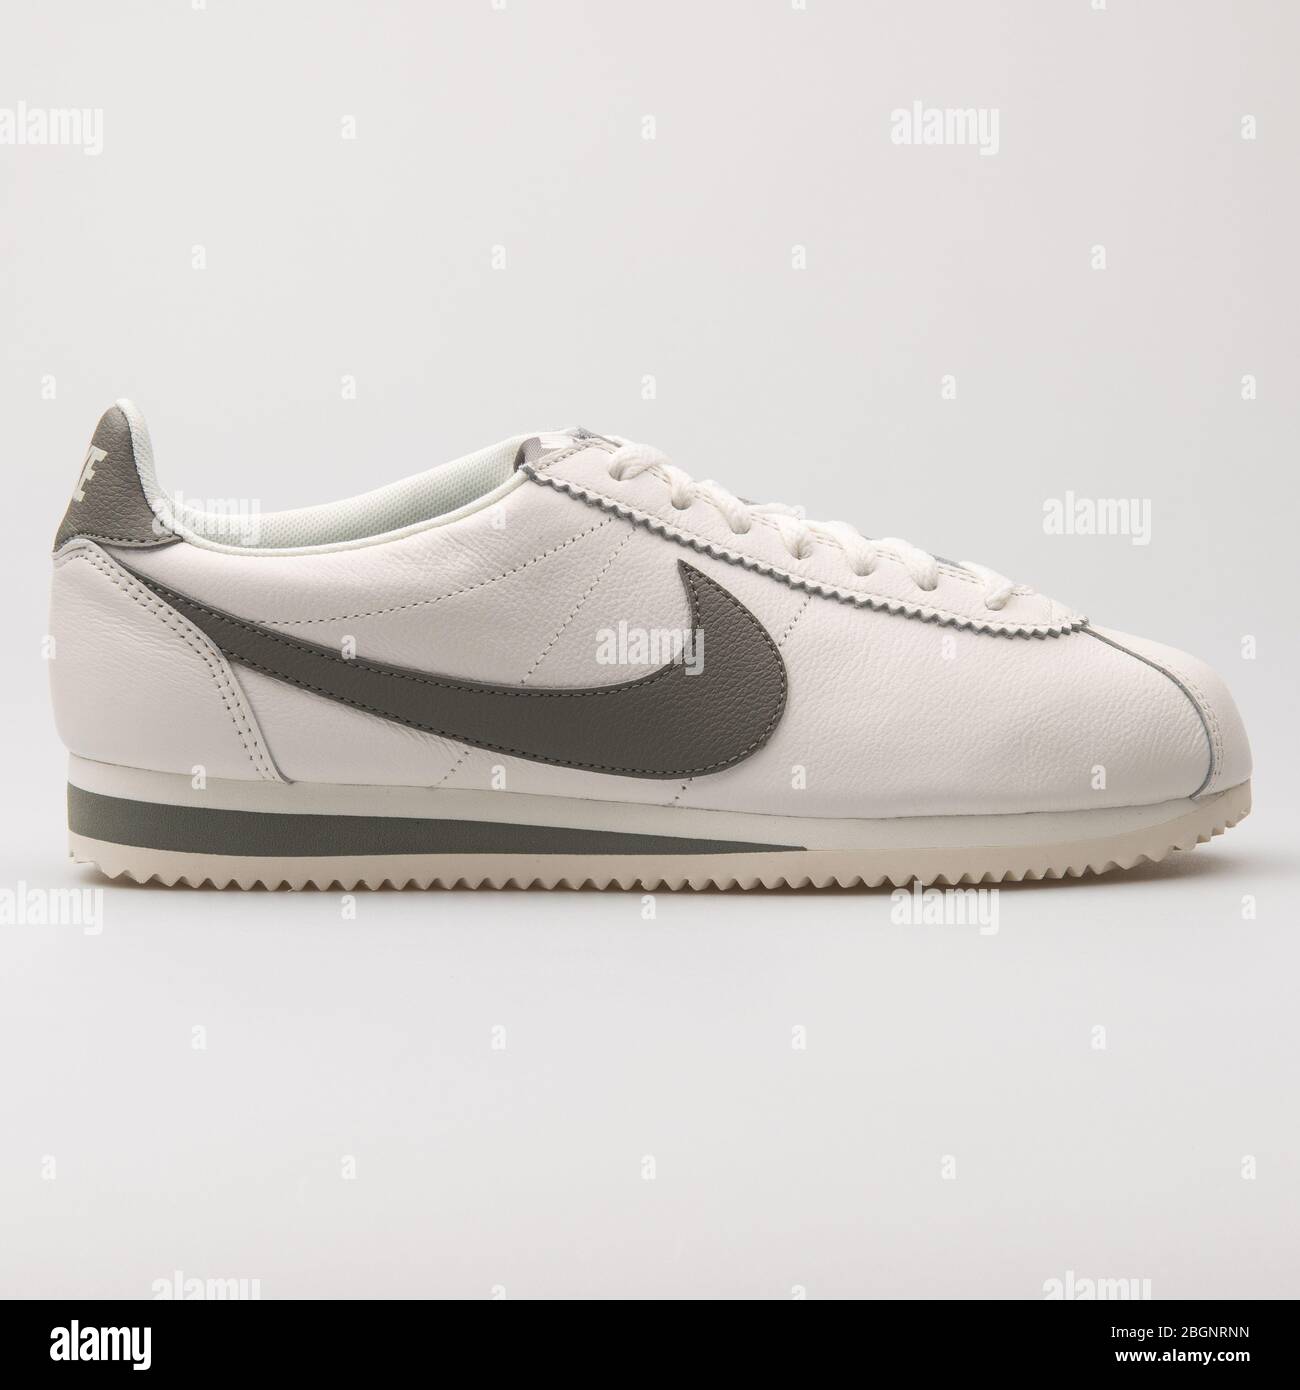 VIENNA, AUSTRIA - AUGUST 24, 2017: Nike Classic Cortez Leather suede white  and grey sneaker on white background Stock Photo - Alamy